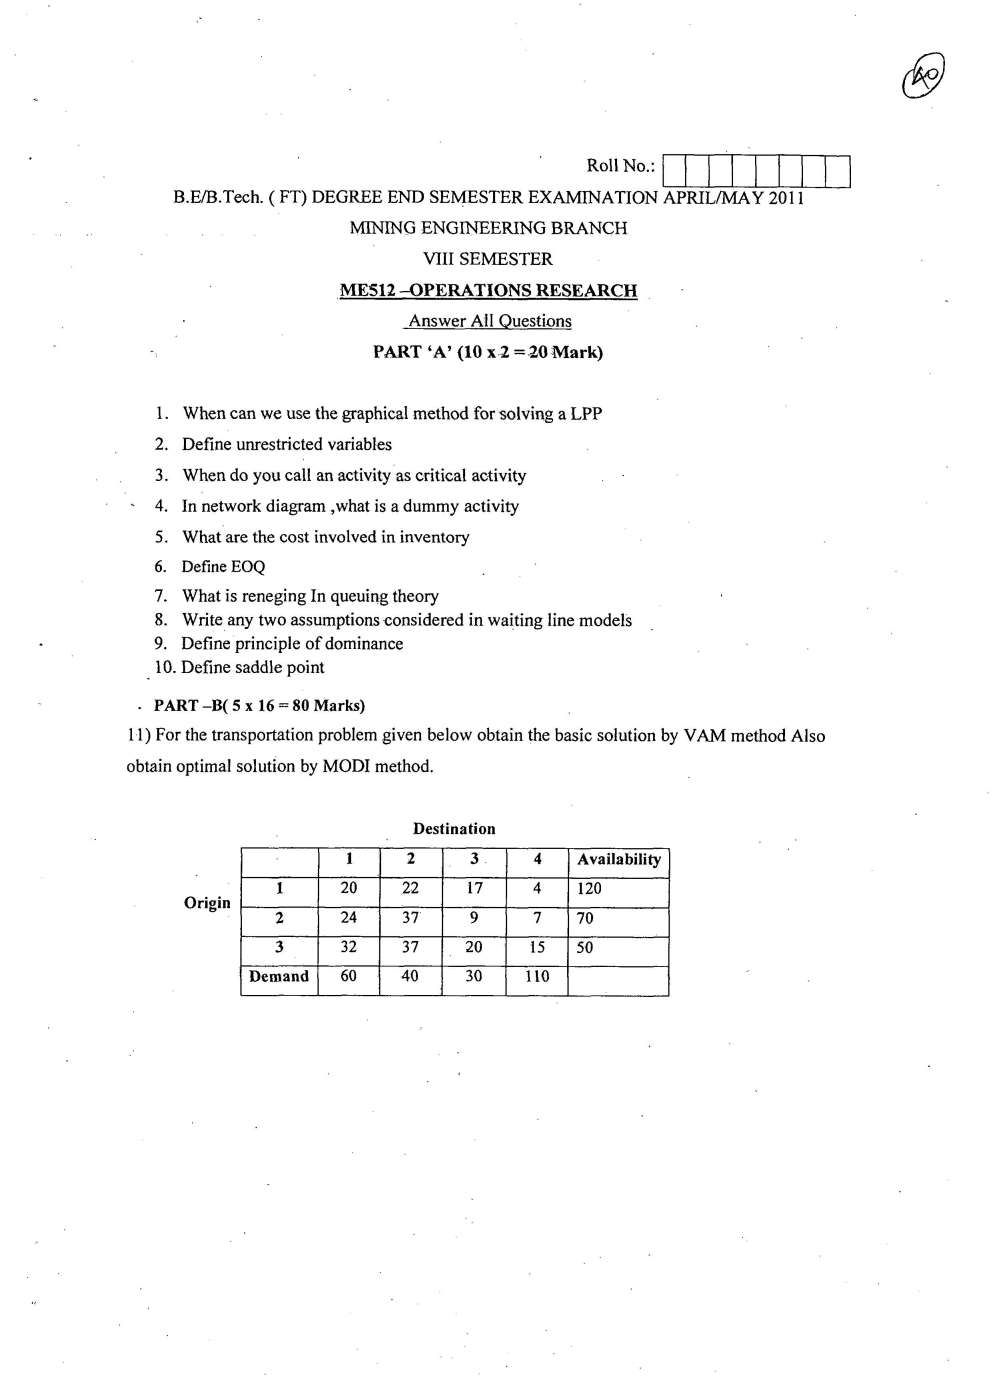 operations research question papers